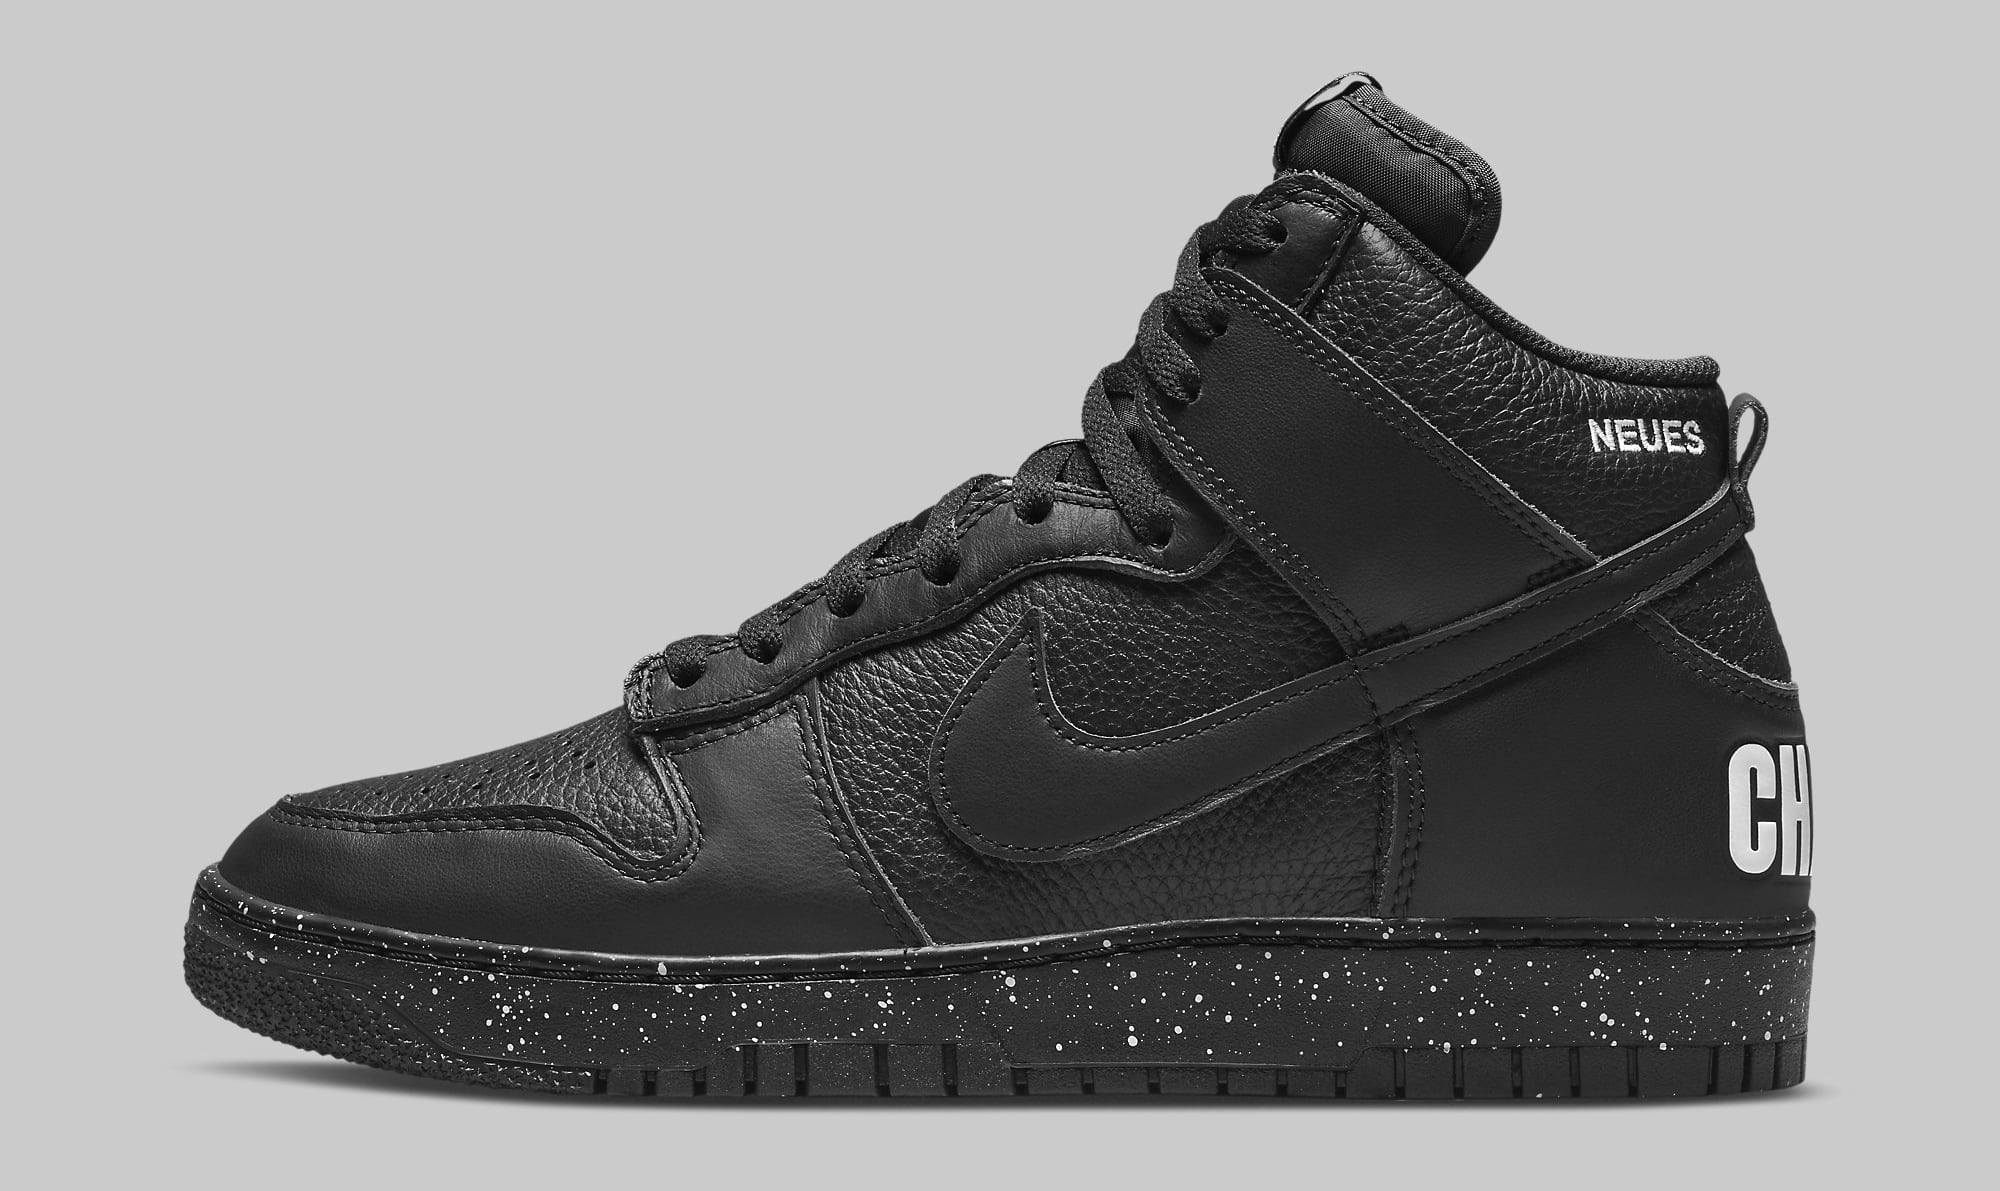 Undercover x Nike Dunk High 'Black' DQ4121 001 Lateral